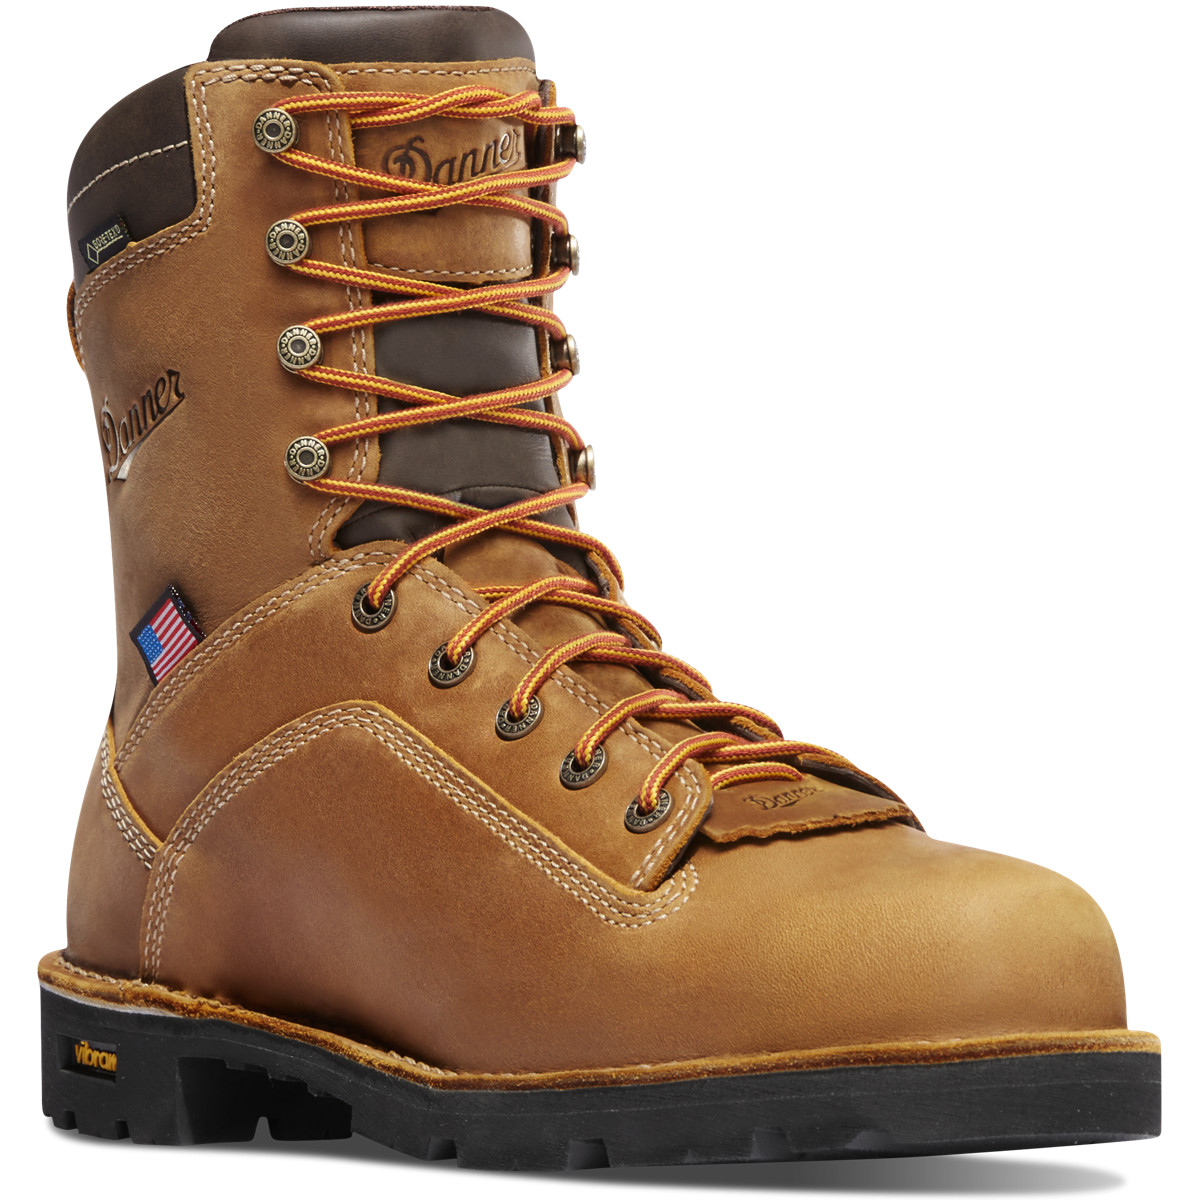 Danner Mens Quarry USA Work Boots Brown - XIT346107